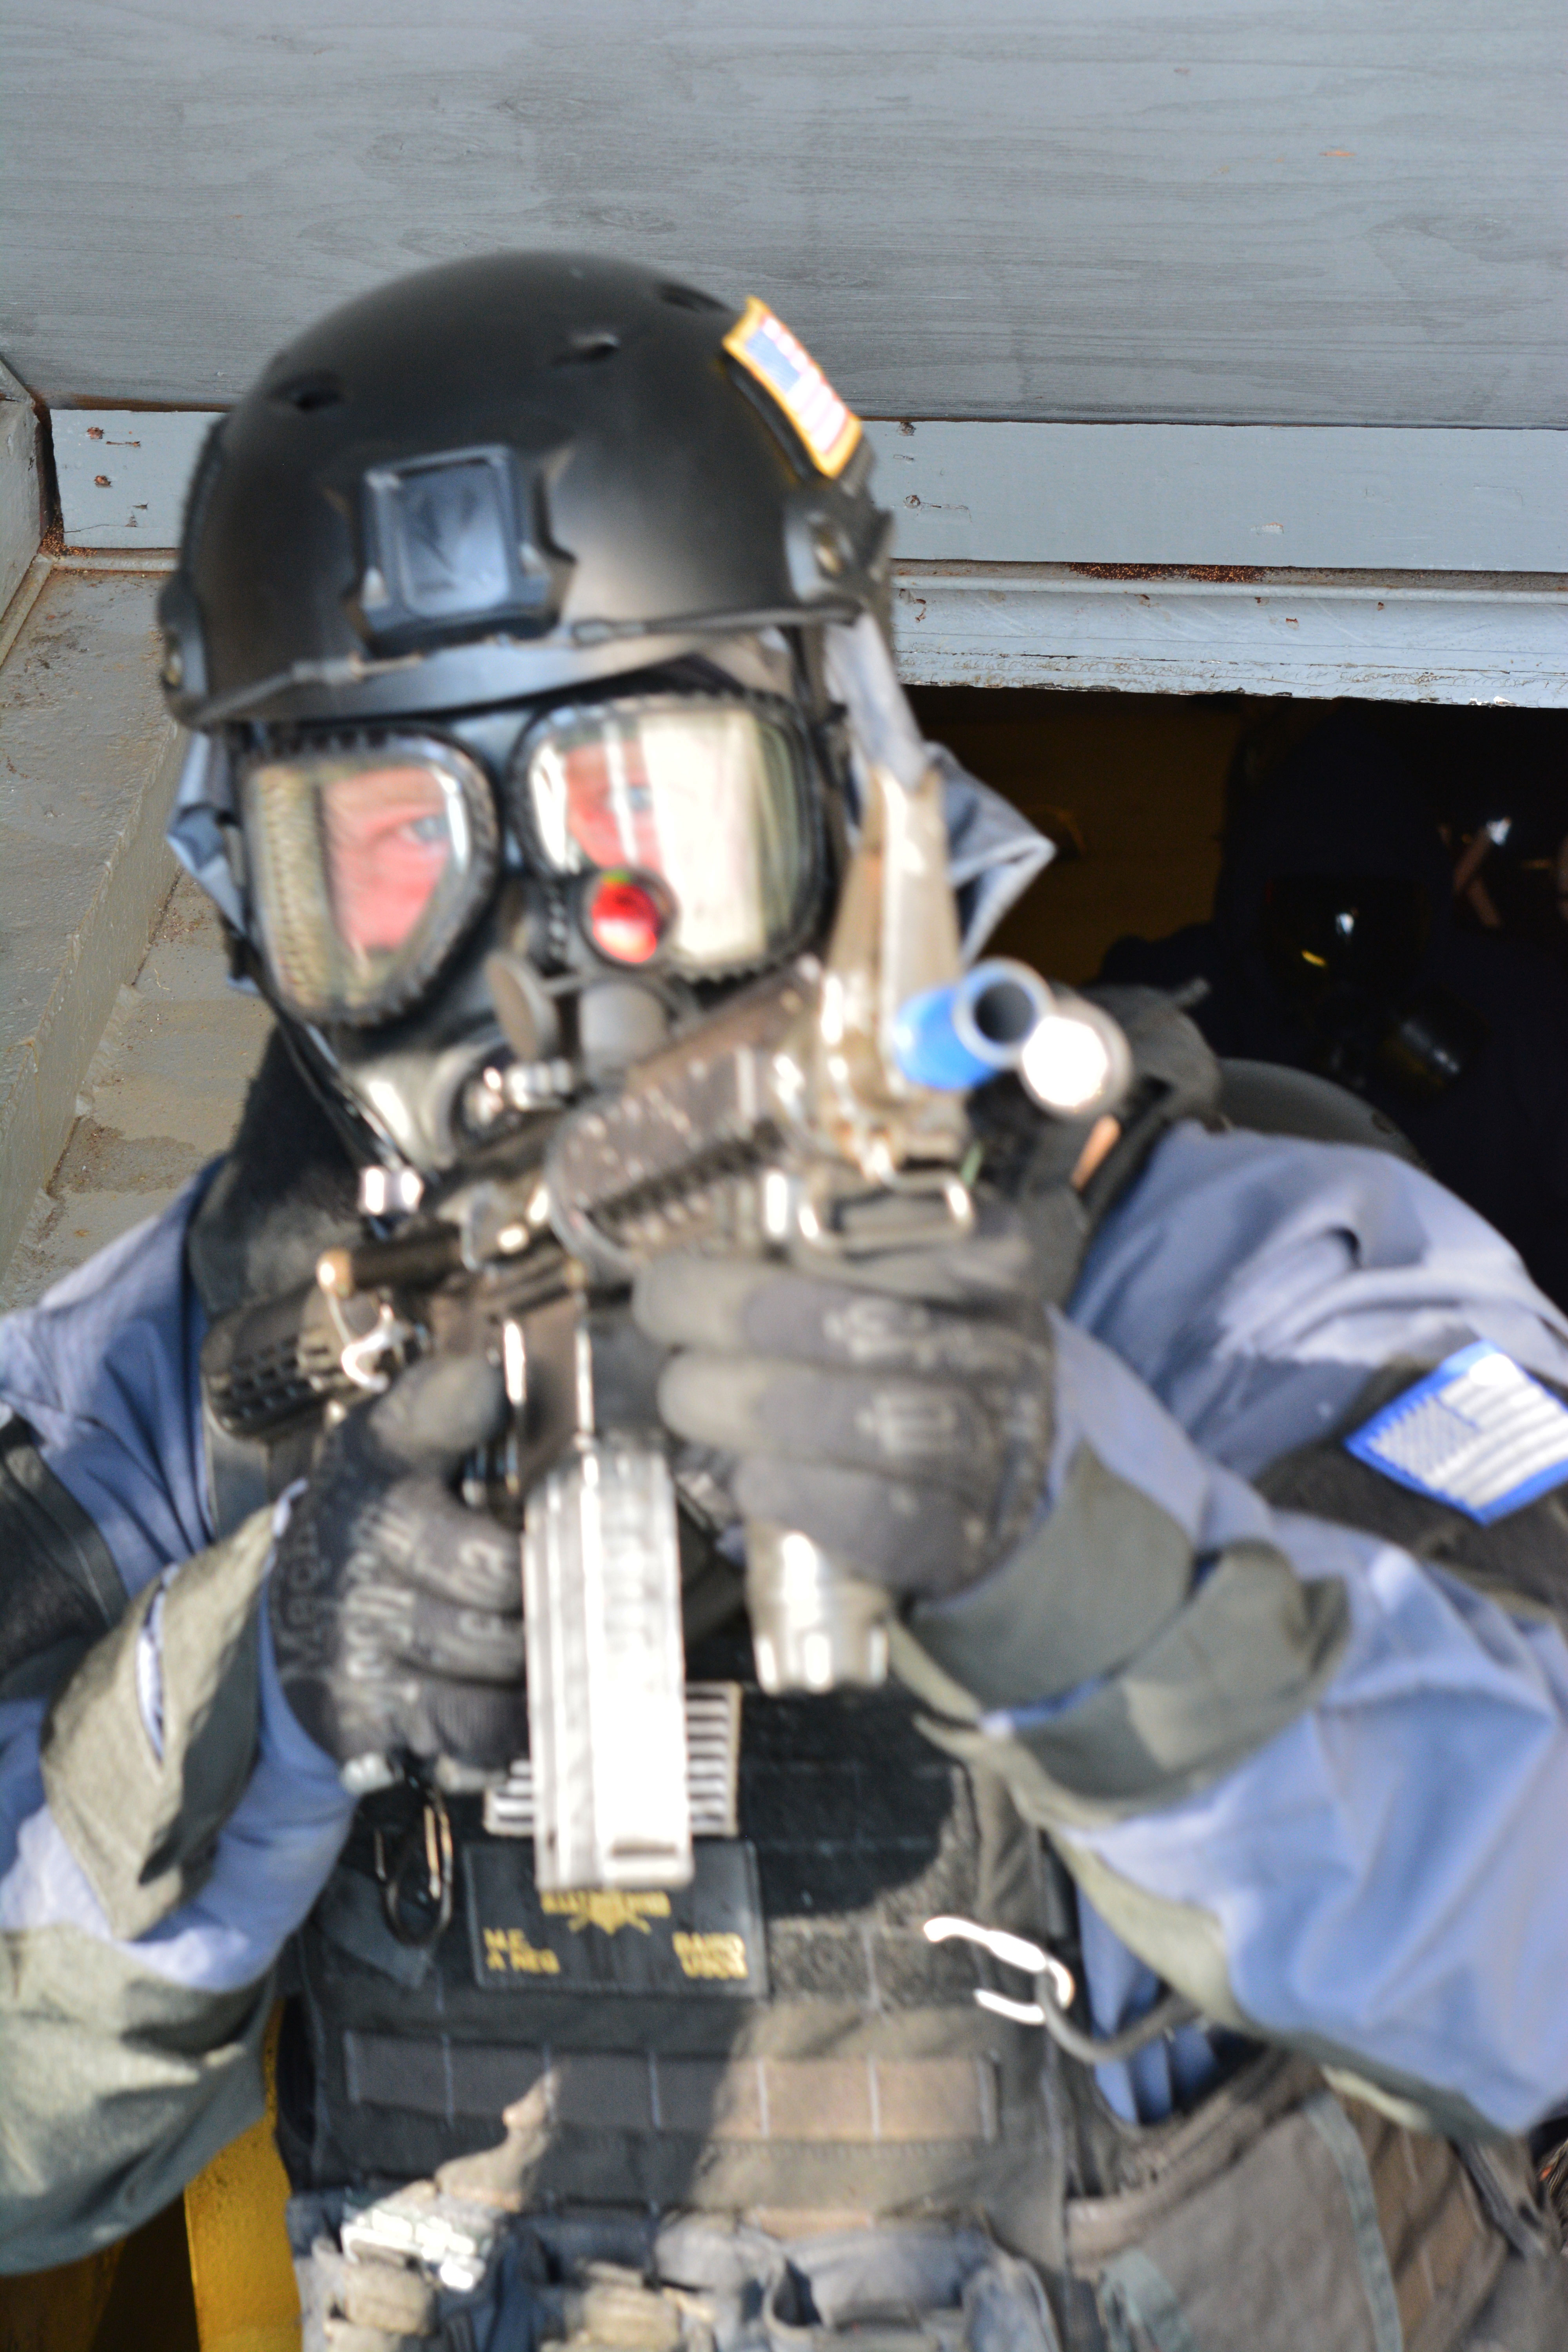 MSST | Maritime Safety and Security Team | CB Dry Suit